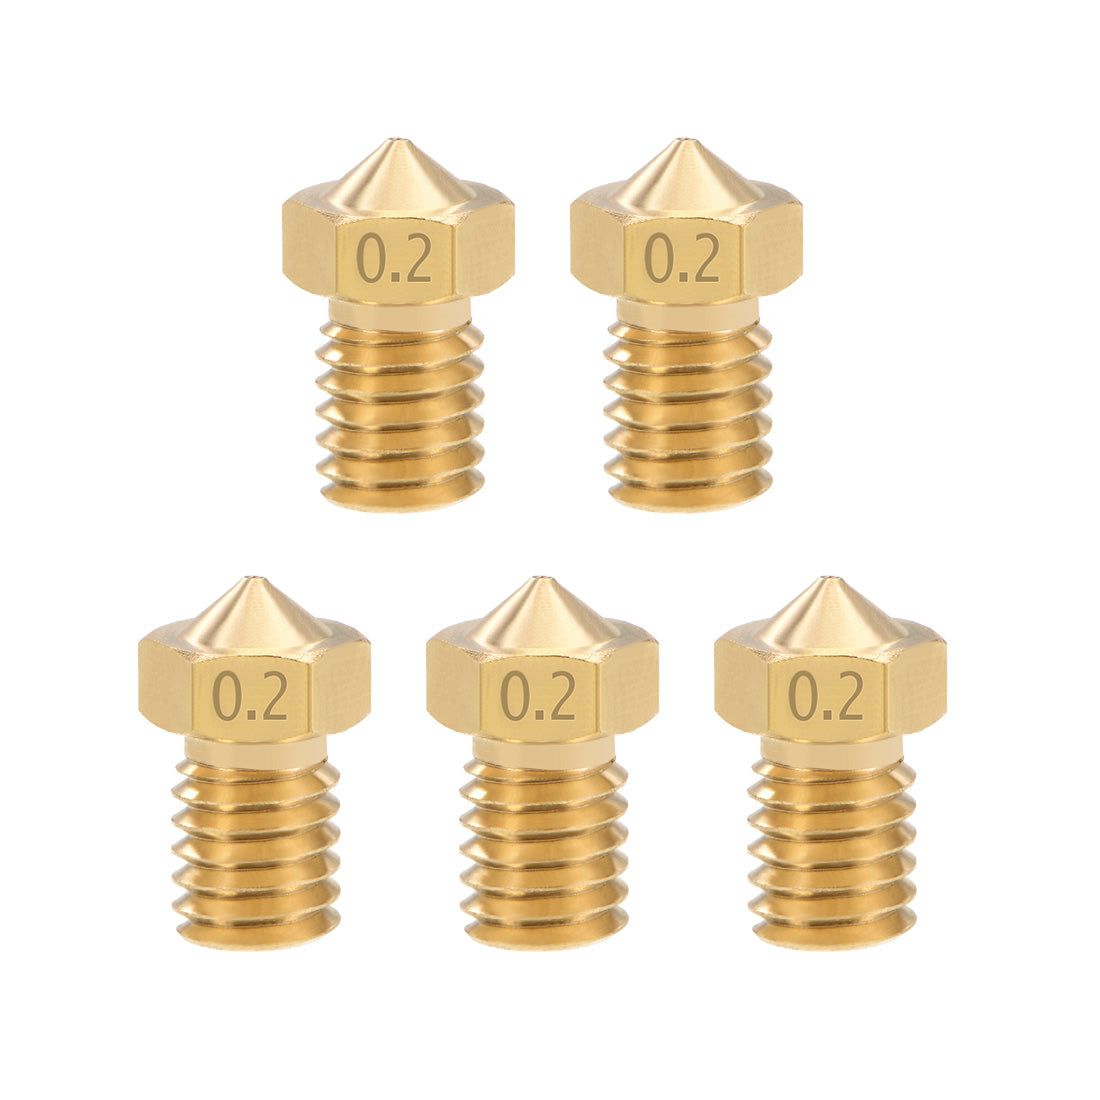 uxcell Uxcell 0.2mm 3D Printer Nozzle Head M6 Thread Replacement for V5 V6 1.75mm Extruder Print, Brass 5pcs